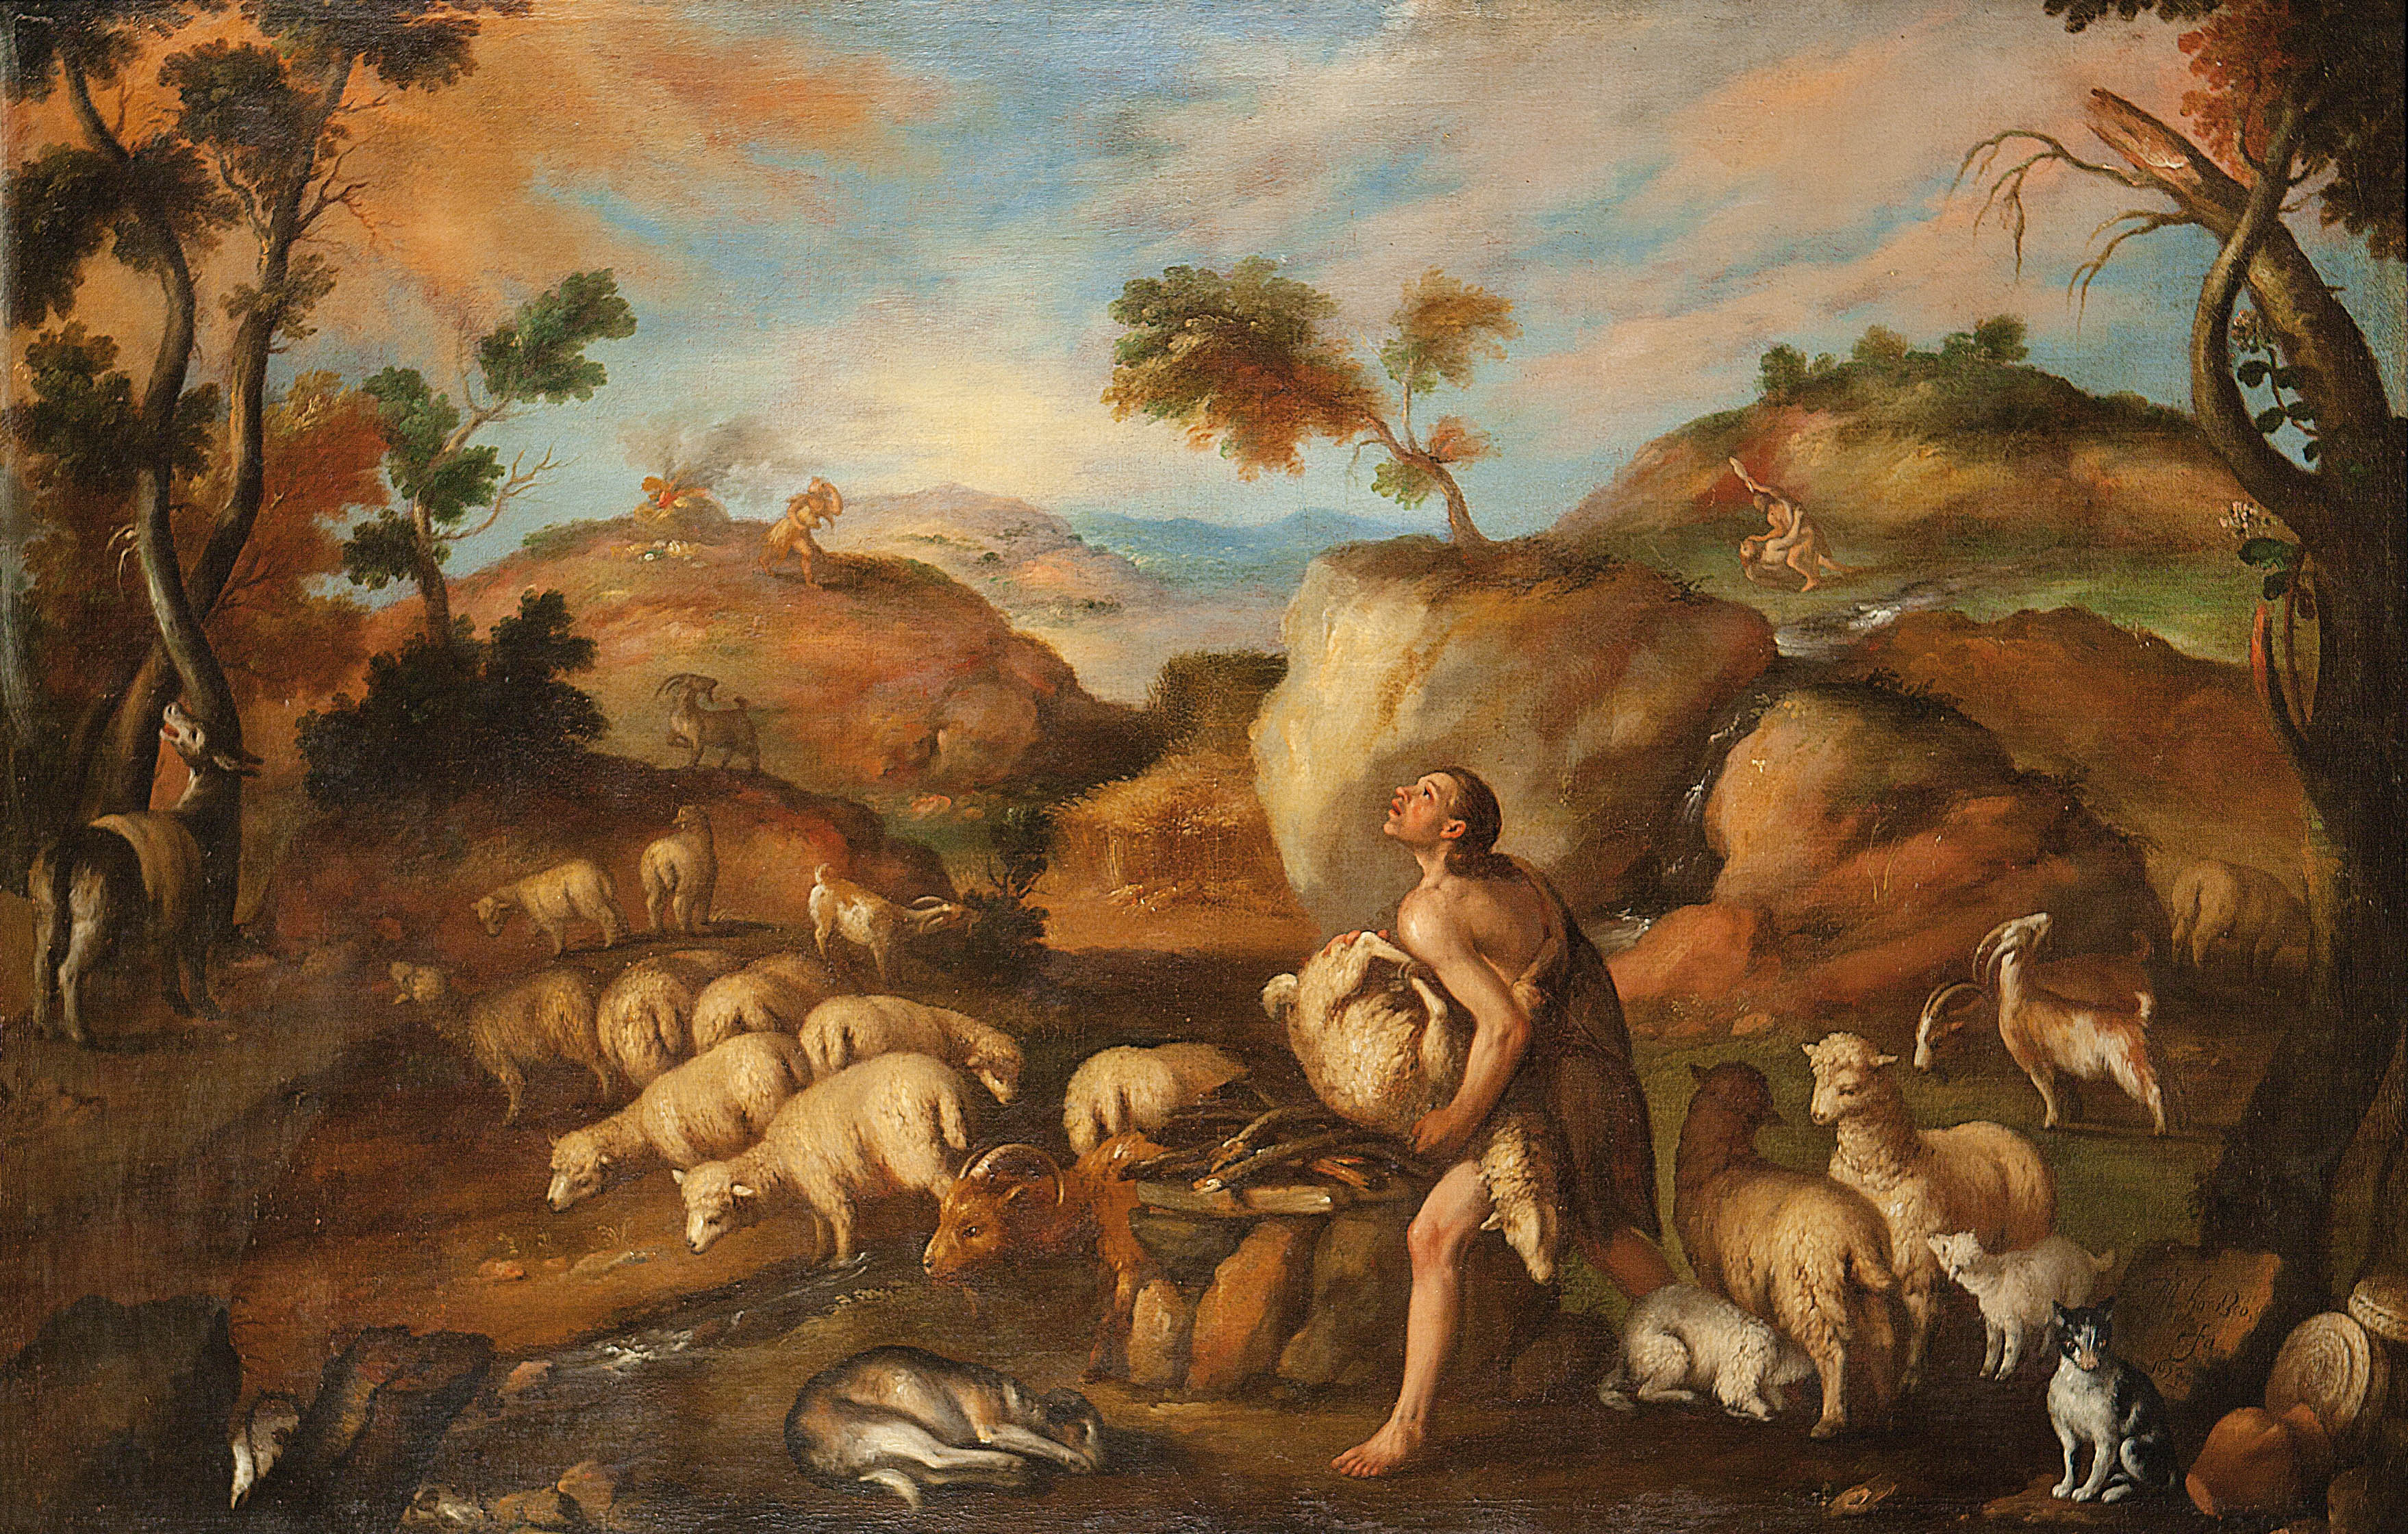 "Cain and Abel" by Mateo Orozco, 17th Century